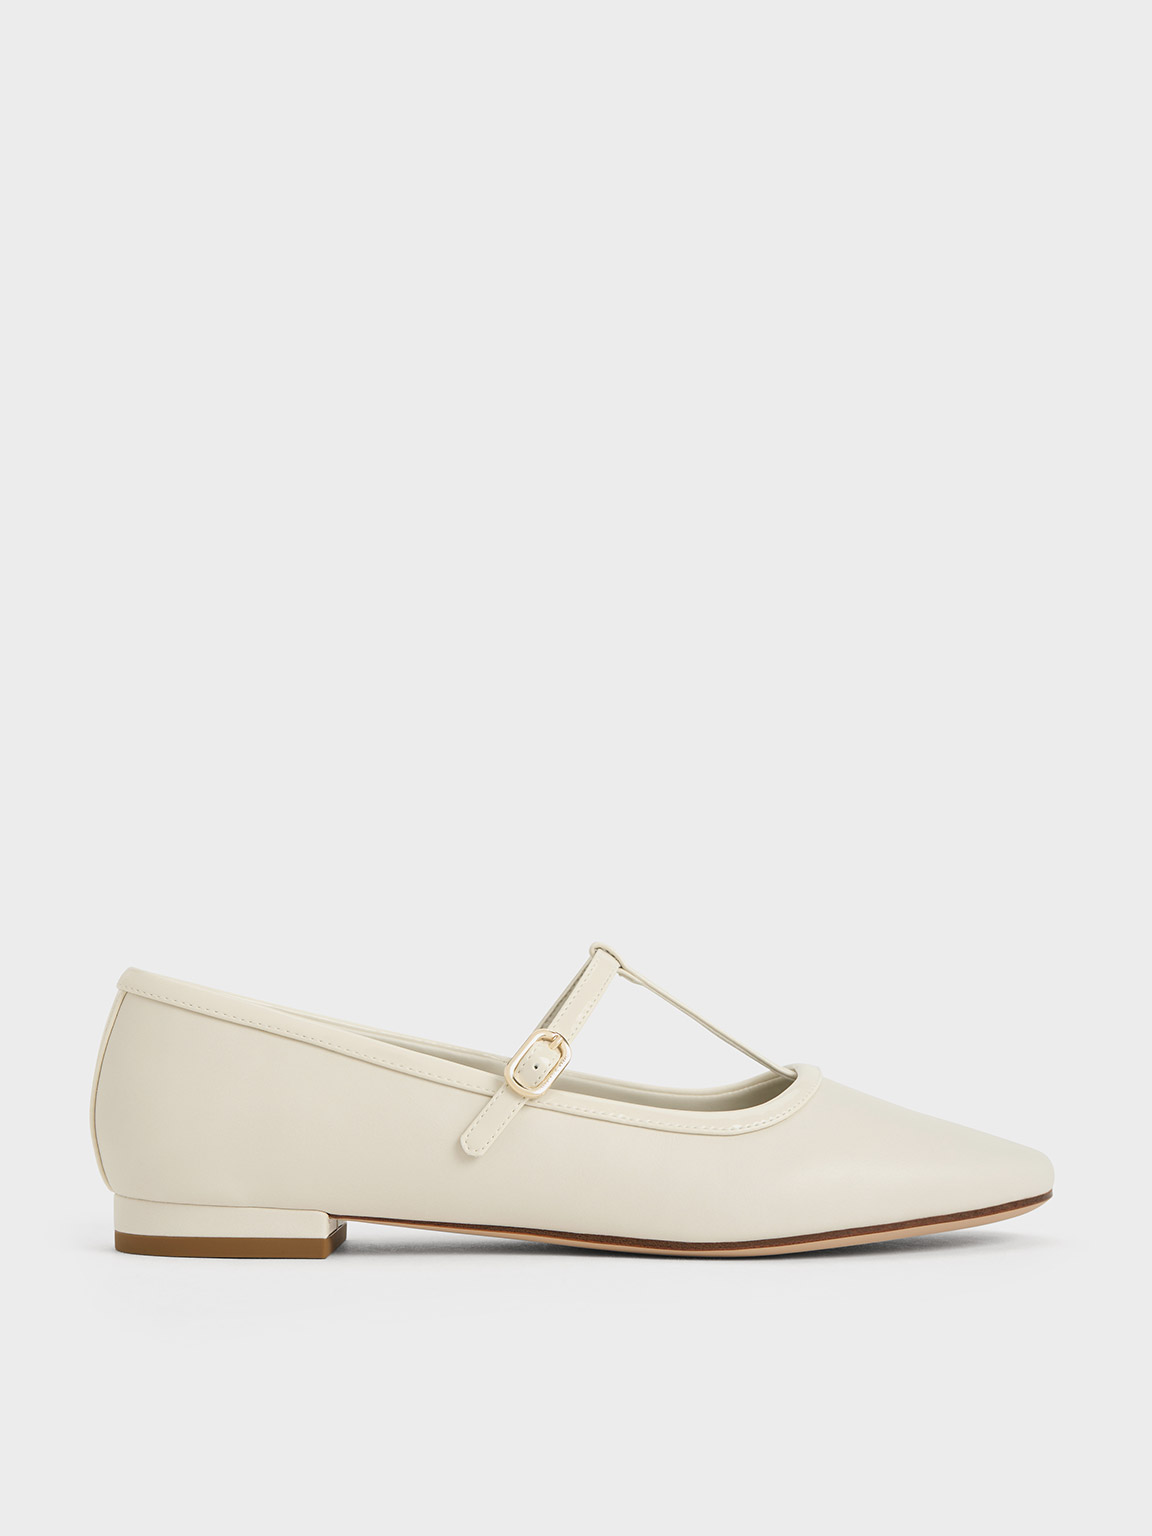 Charles & Keith T-bar Mary Jane Flats In Chalk